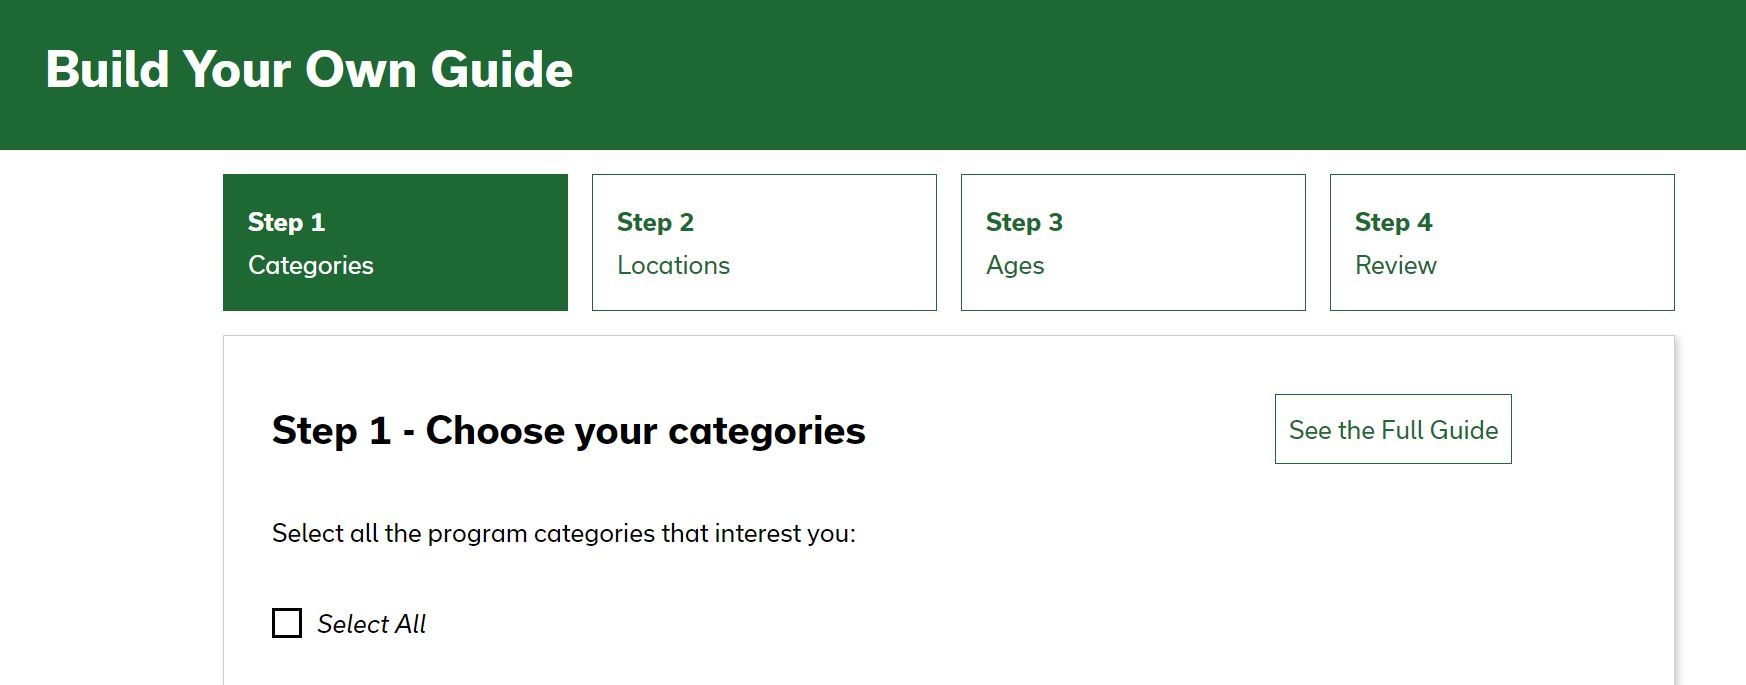 A screenshot of the online guide tool